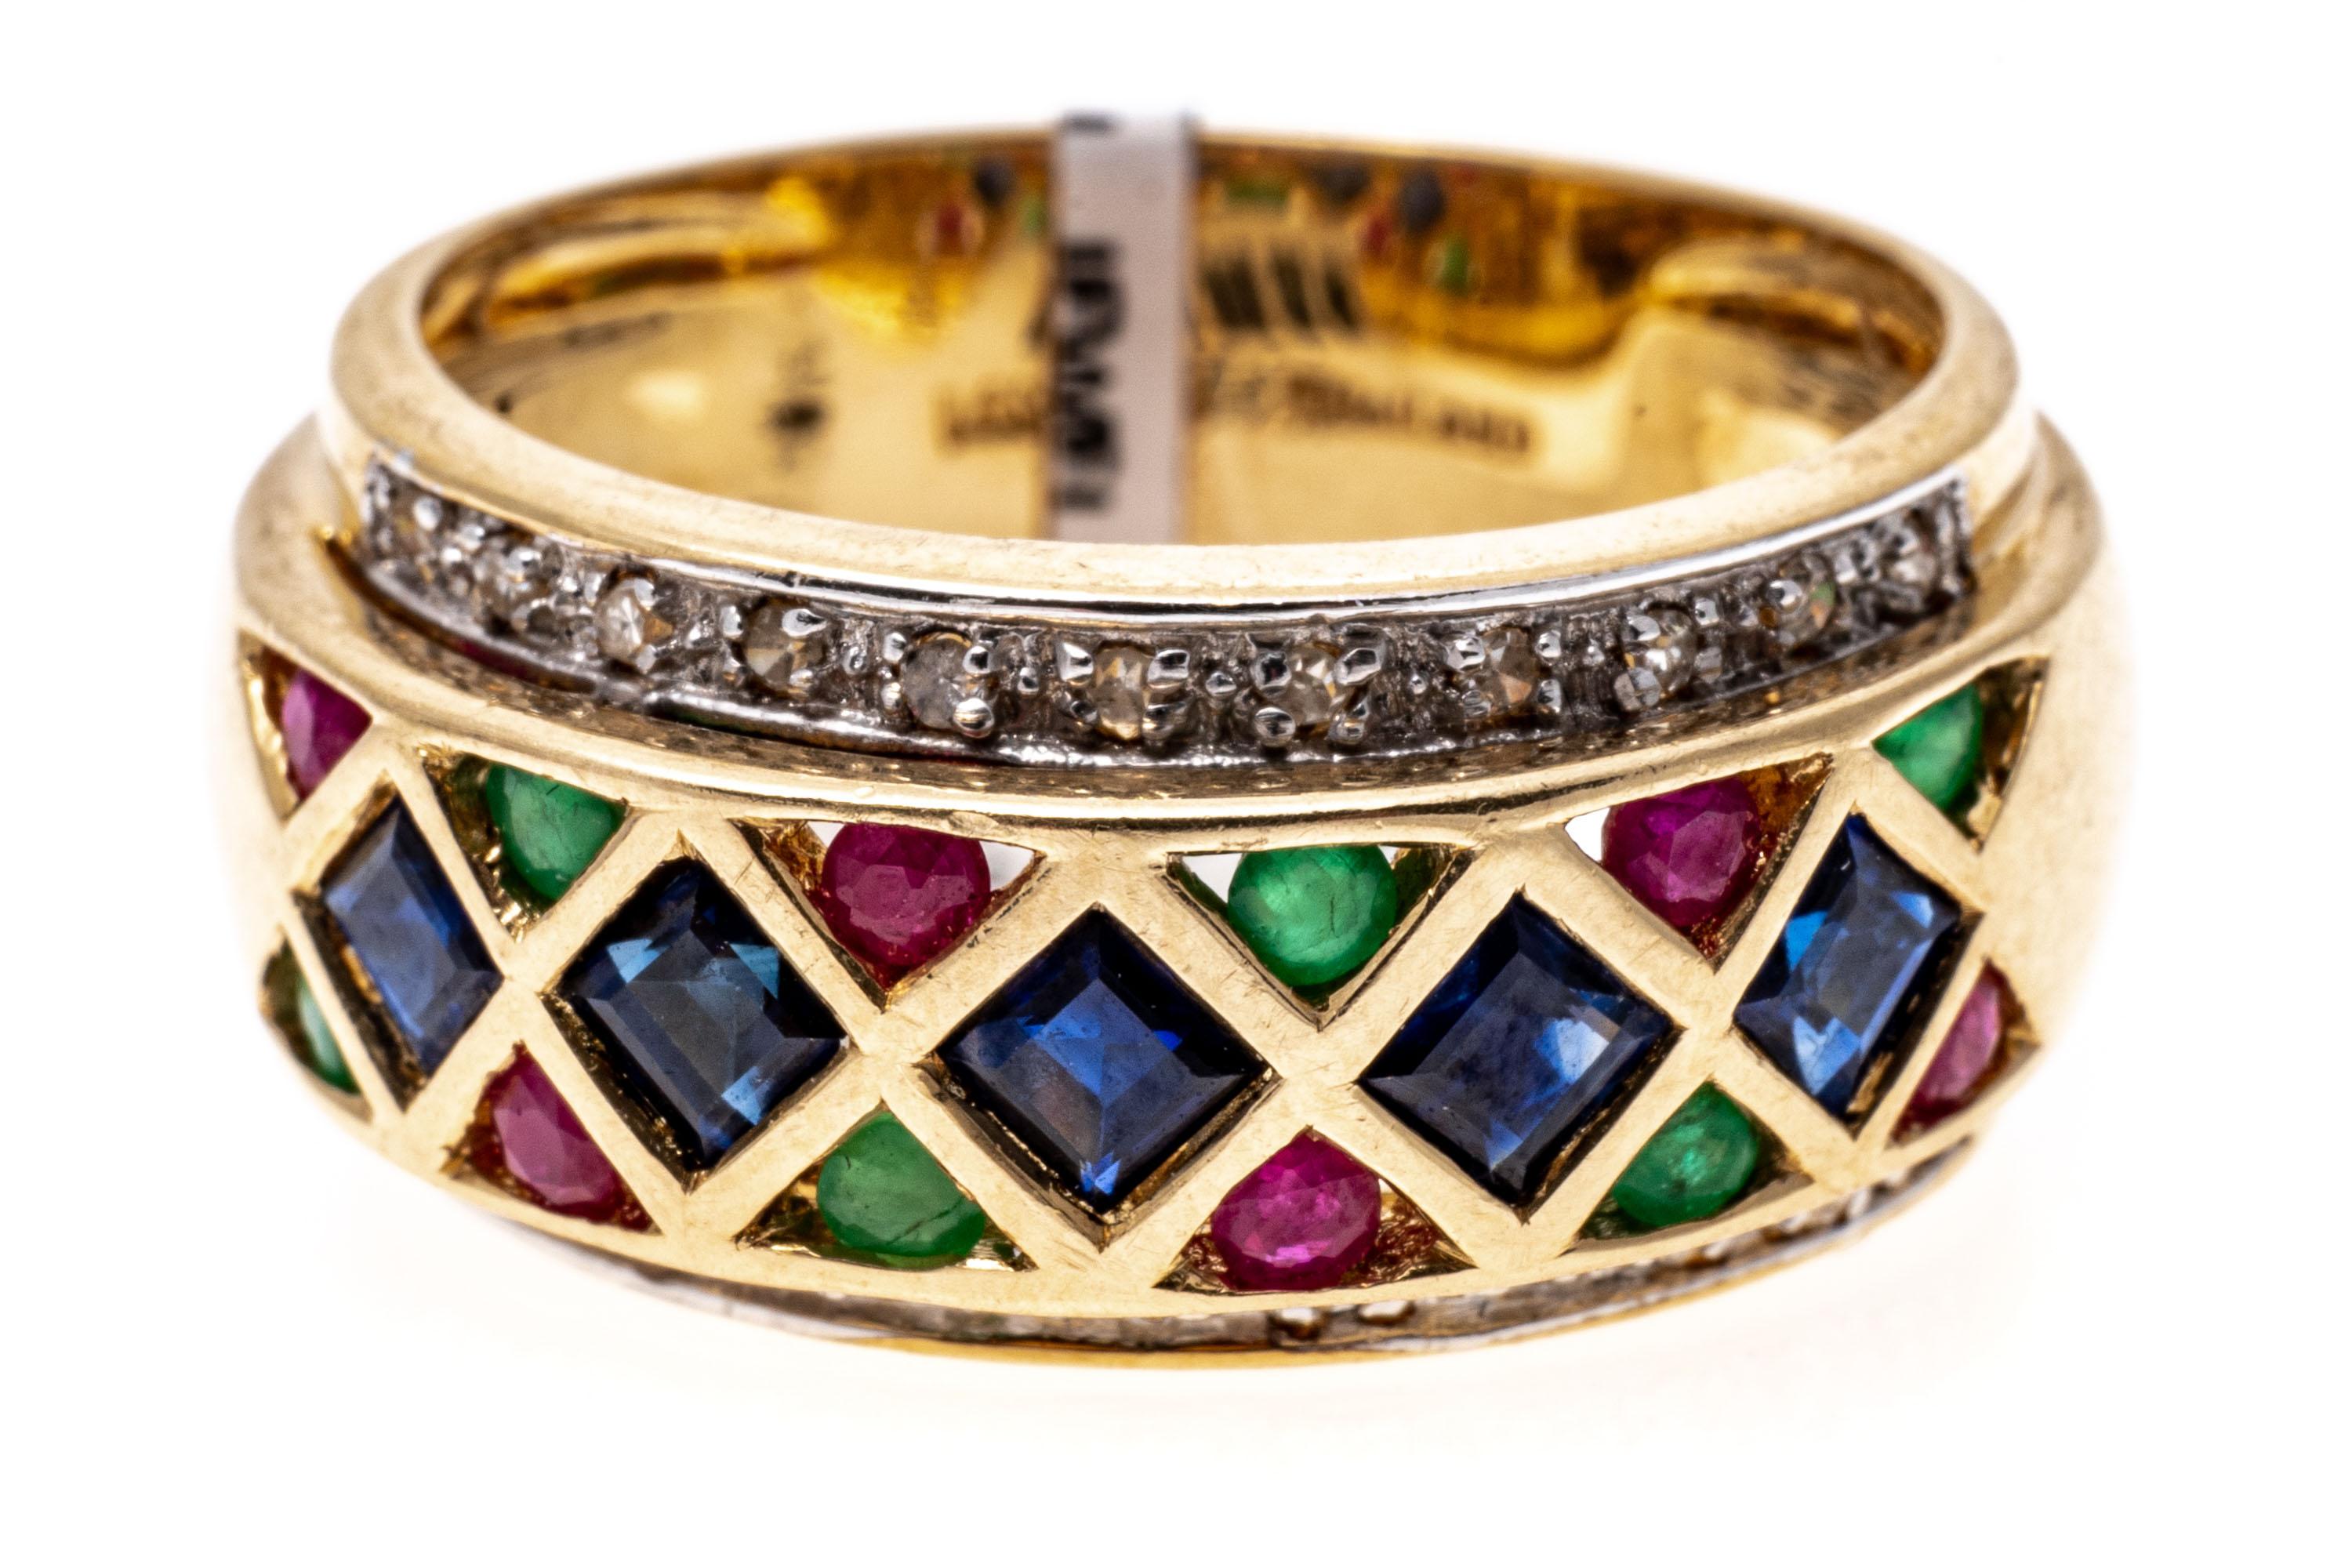 14k Yellow Gold Fun Harlequin Pattern Sapphire, Ruby, Emerald And Diamond Ring.
This classic ring is executed in a harlequin pattern, with a diamond shaped motif. In the center is a row of square faceted, navy blue color sapphires, approximately